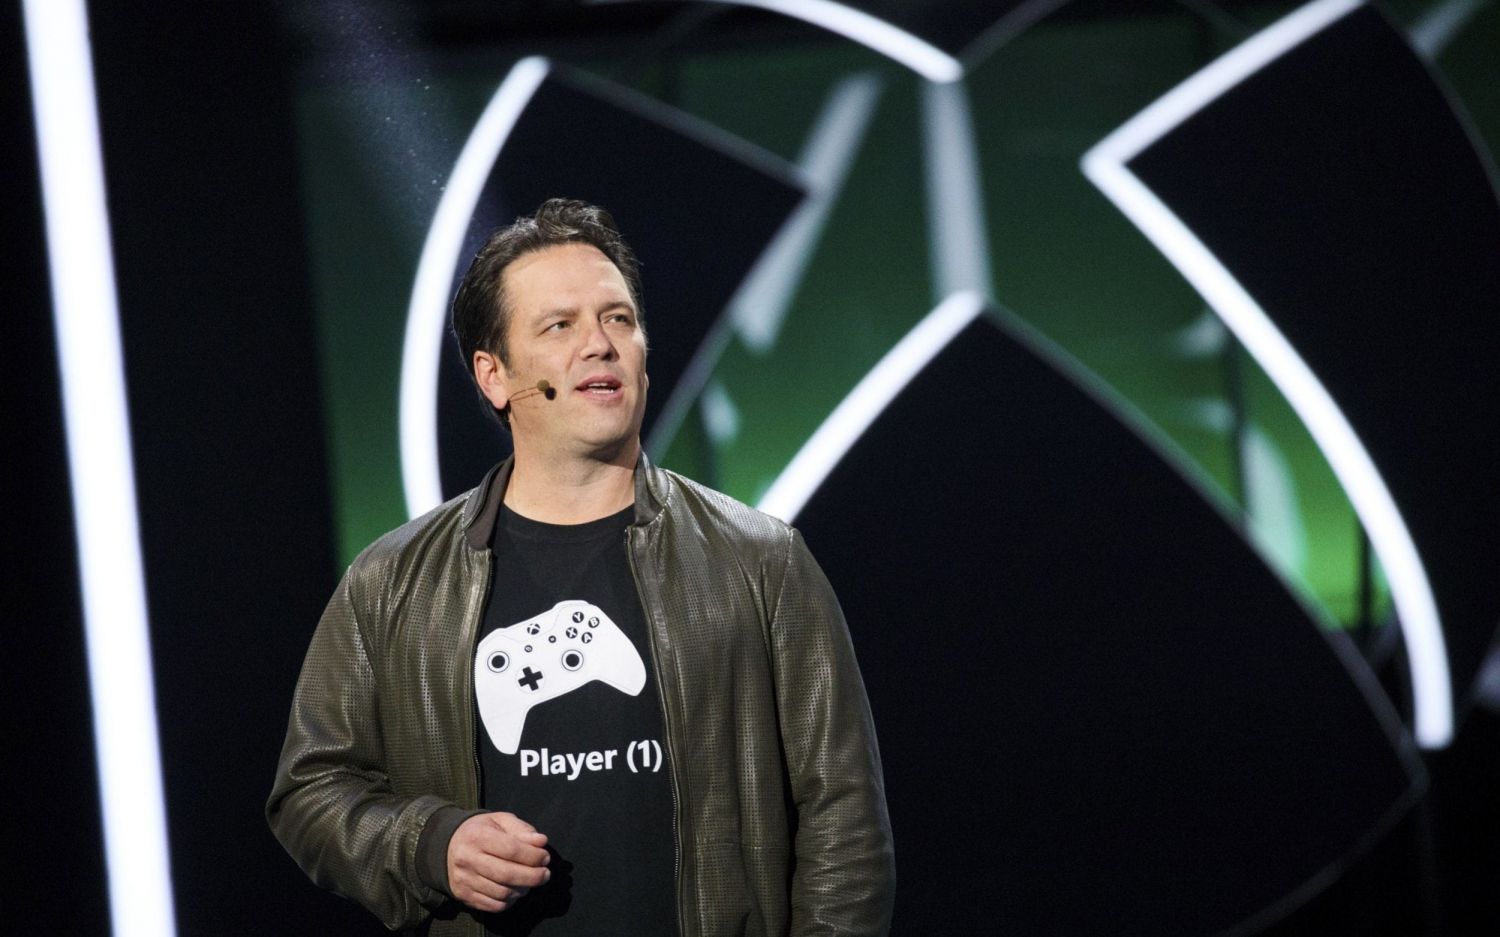 Xbox's Phil Spencer confirms the exclusive news about The Elder Scrolls 6.